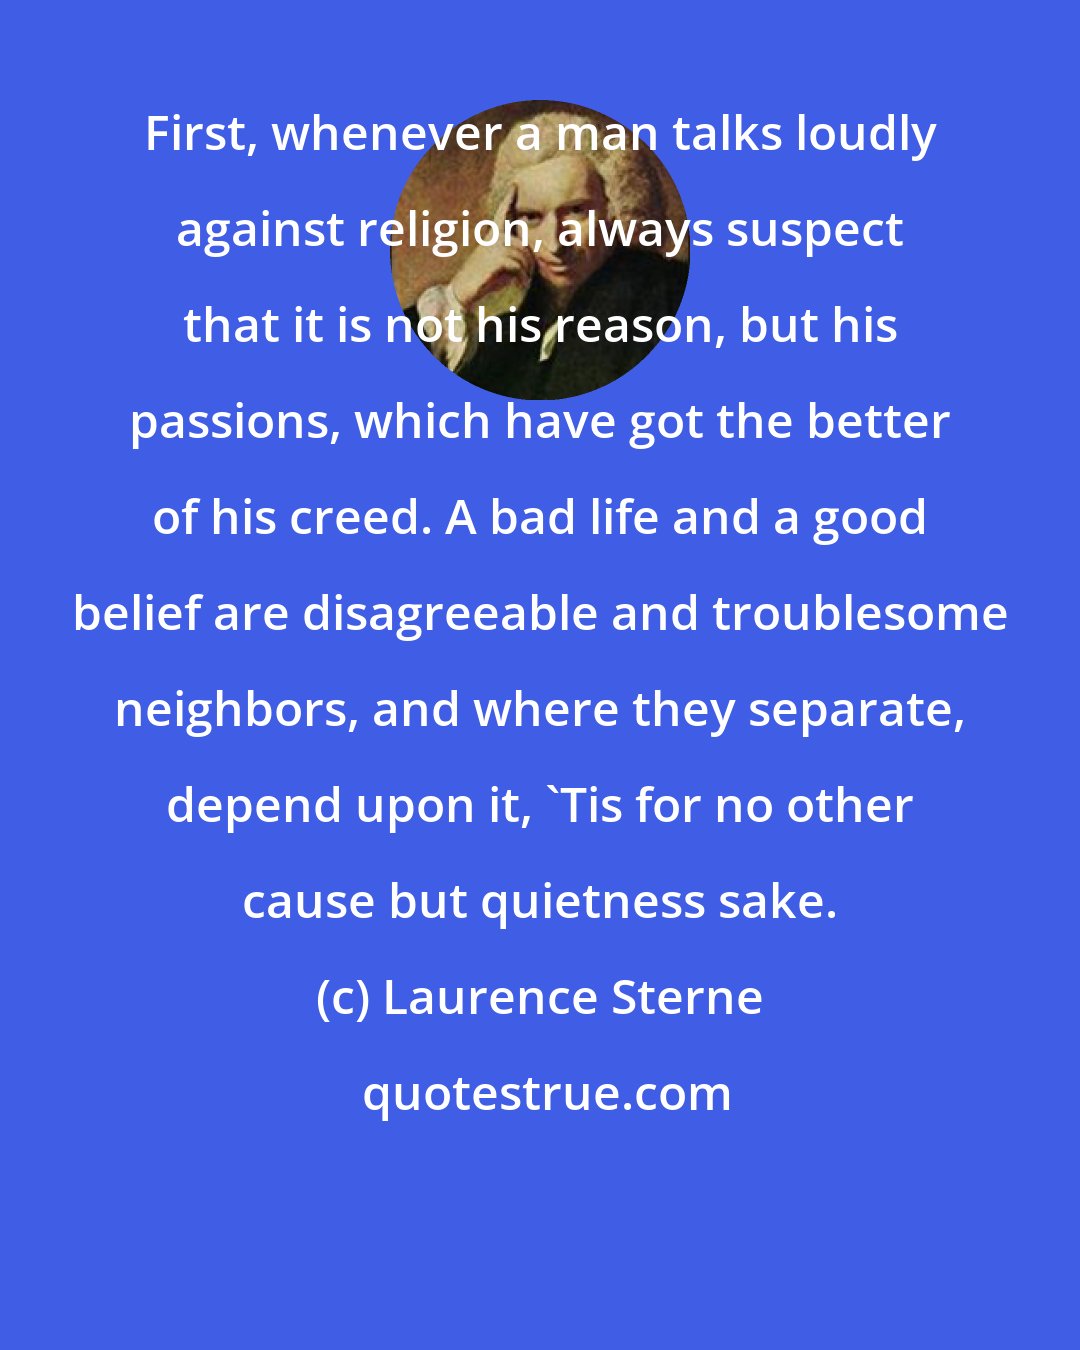 Laurence Sterne: First, whenever a man talks loudly against religion, always suspect that it is not his reason, but his passions, which have got the better of his creed. A bad life and a good belief are disagreeable and troublesome neighbors, and where they separate, depend upon it, 'Tis for no other cause but quietness sake.